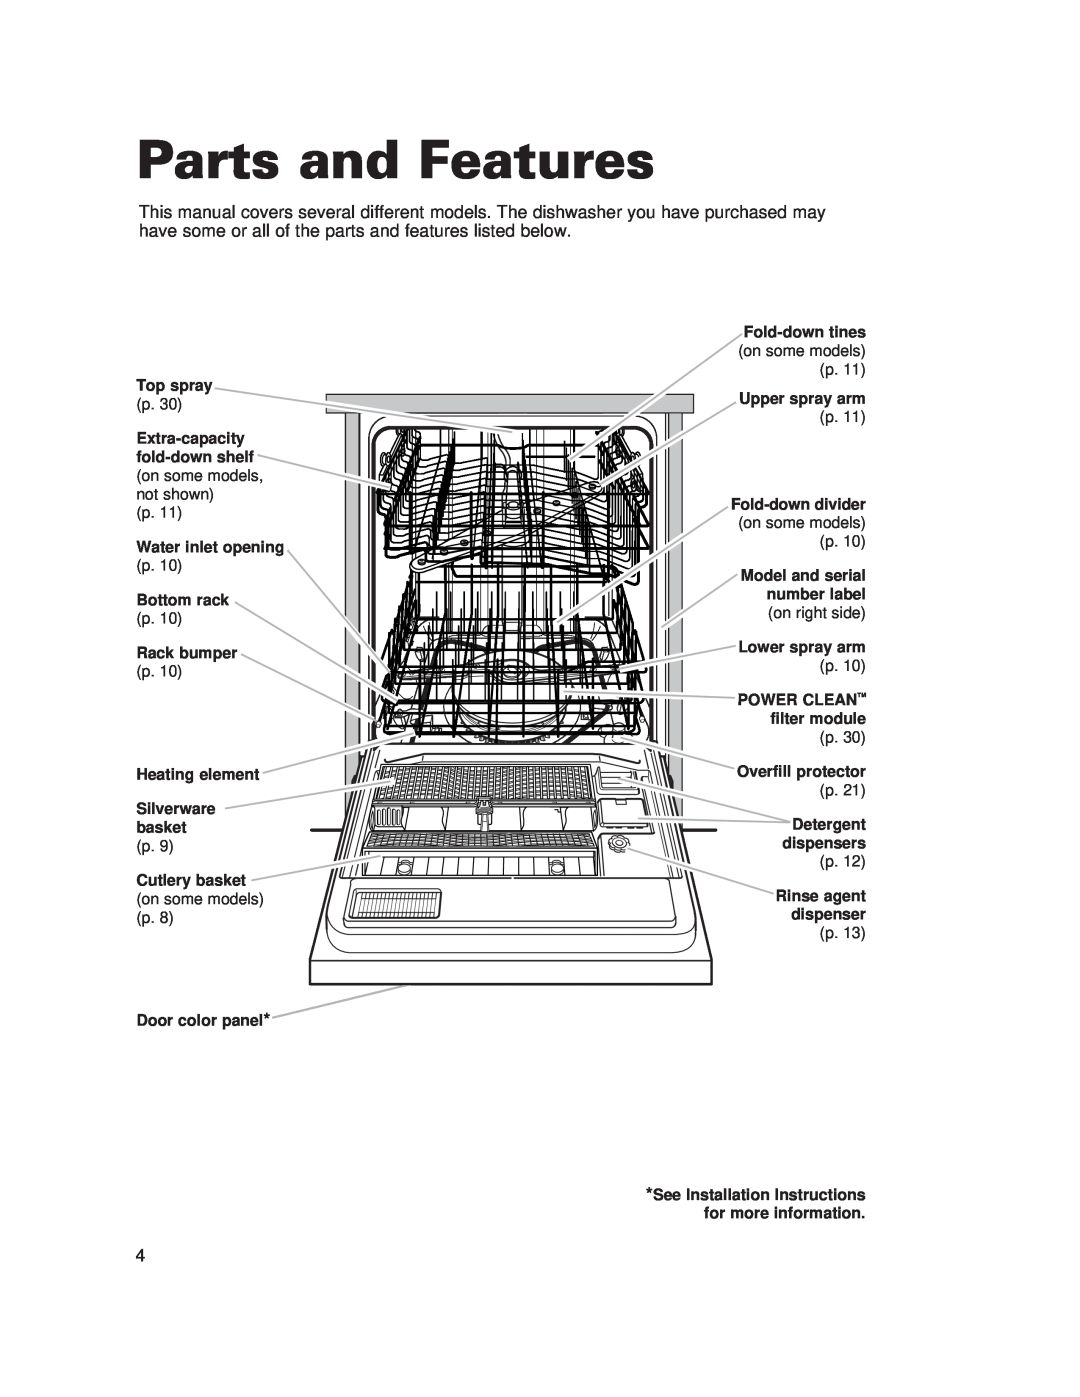 Whirlpool 980 warranty Parts and Features, Top spray, Water inlet opening p. Bottom rack p. Rack bumper, Upper spray arm 